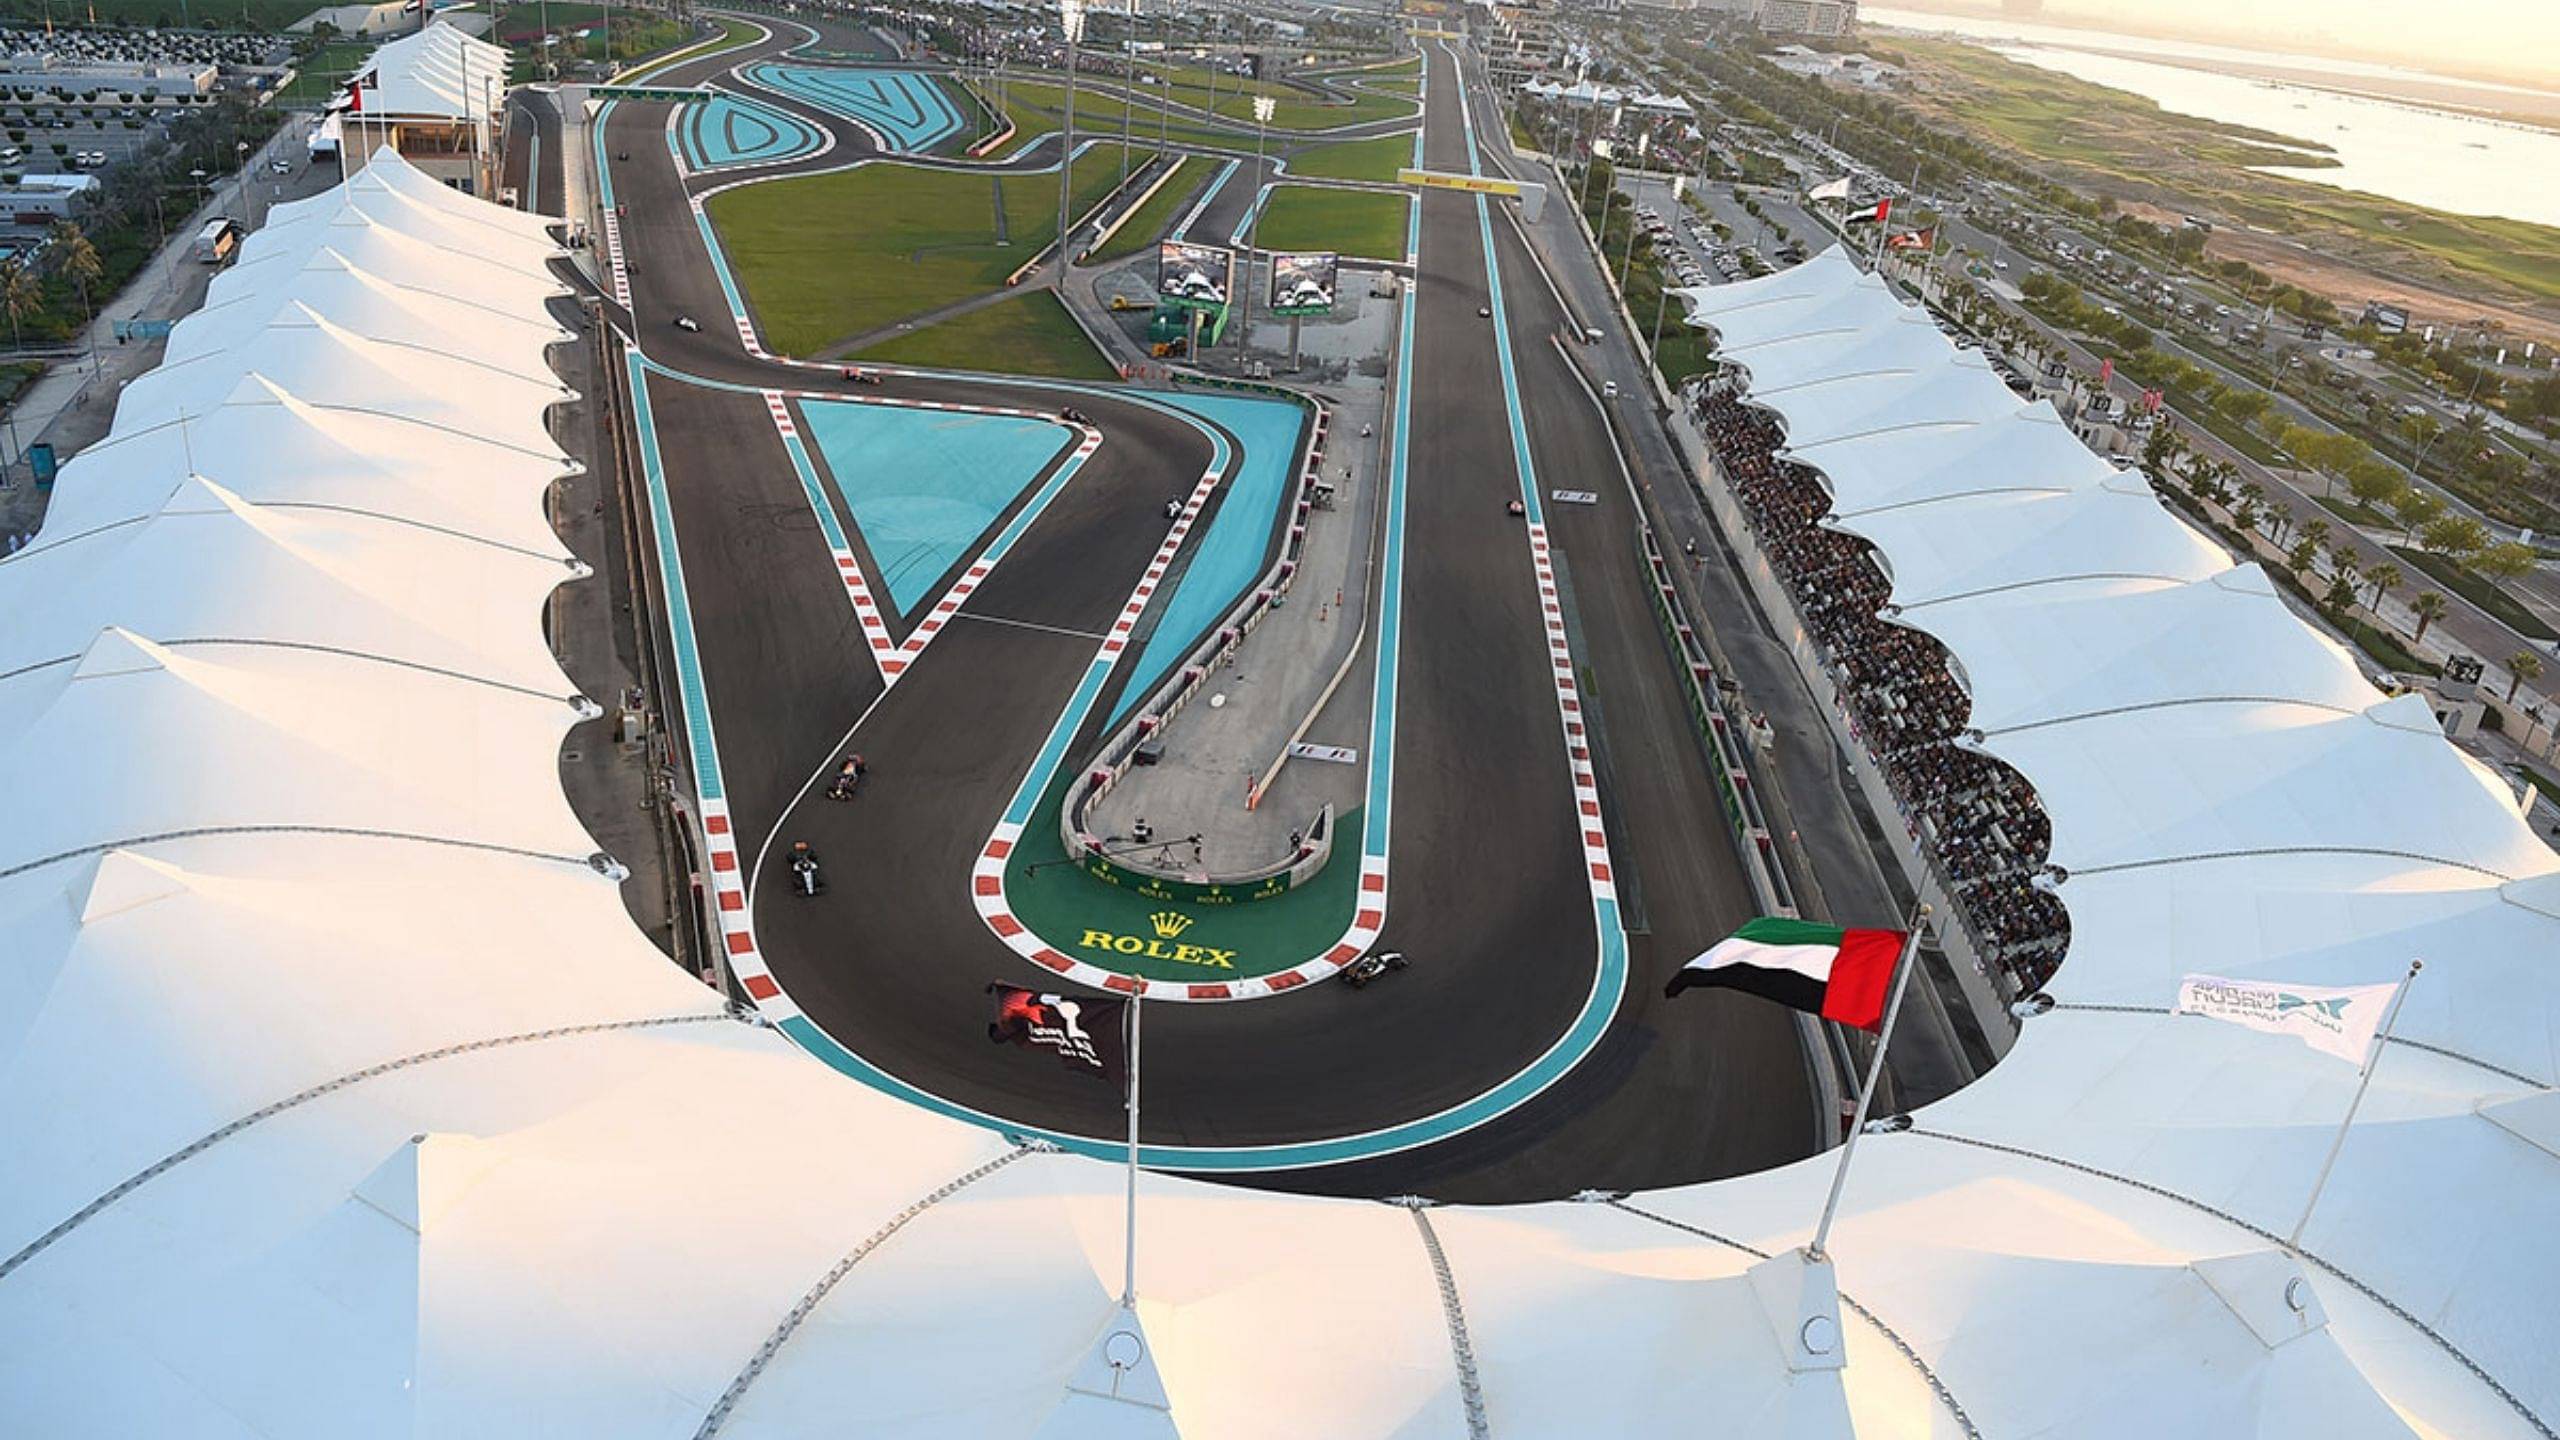 F1 Live Stream Abu Dhabi GP 2020, Start Time and Broadcast Channel When and Where to watch F1 Free Practice, Qualifying and Race held in Abu Dhabi?